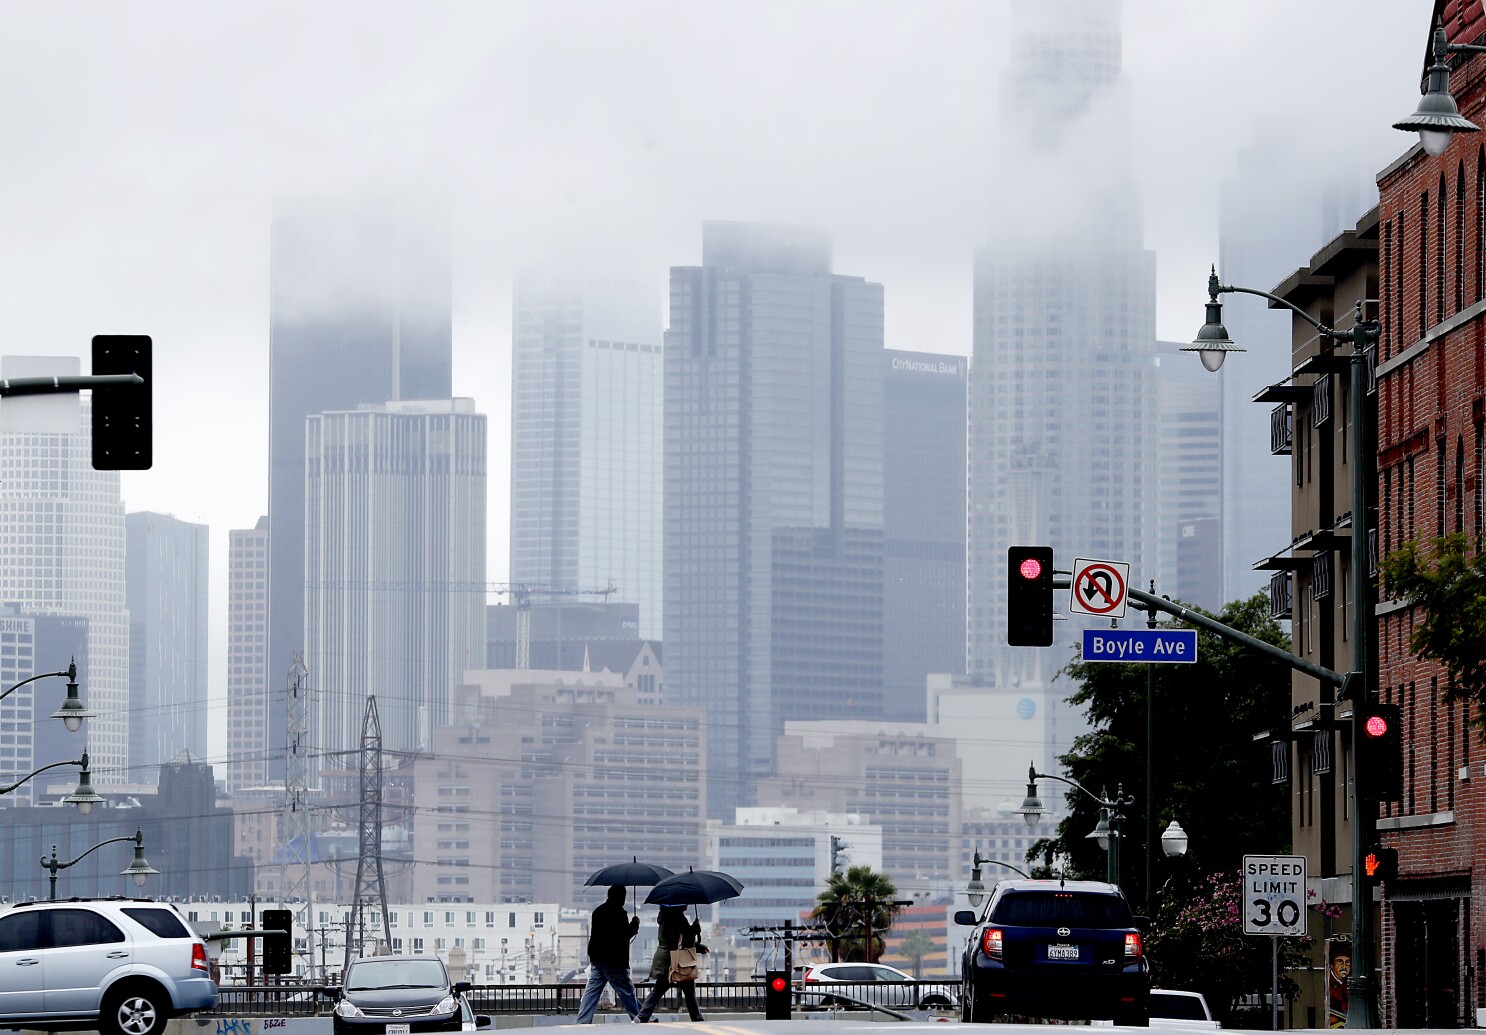 How cold does it get in california in the winter Storm Brings Rain Snow And Cold Temperatures To L A Area Los Angeles Times